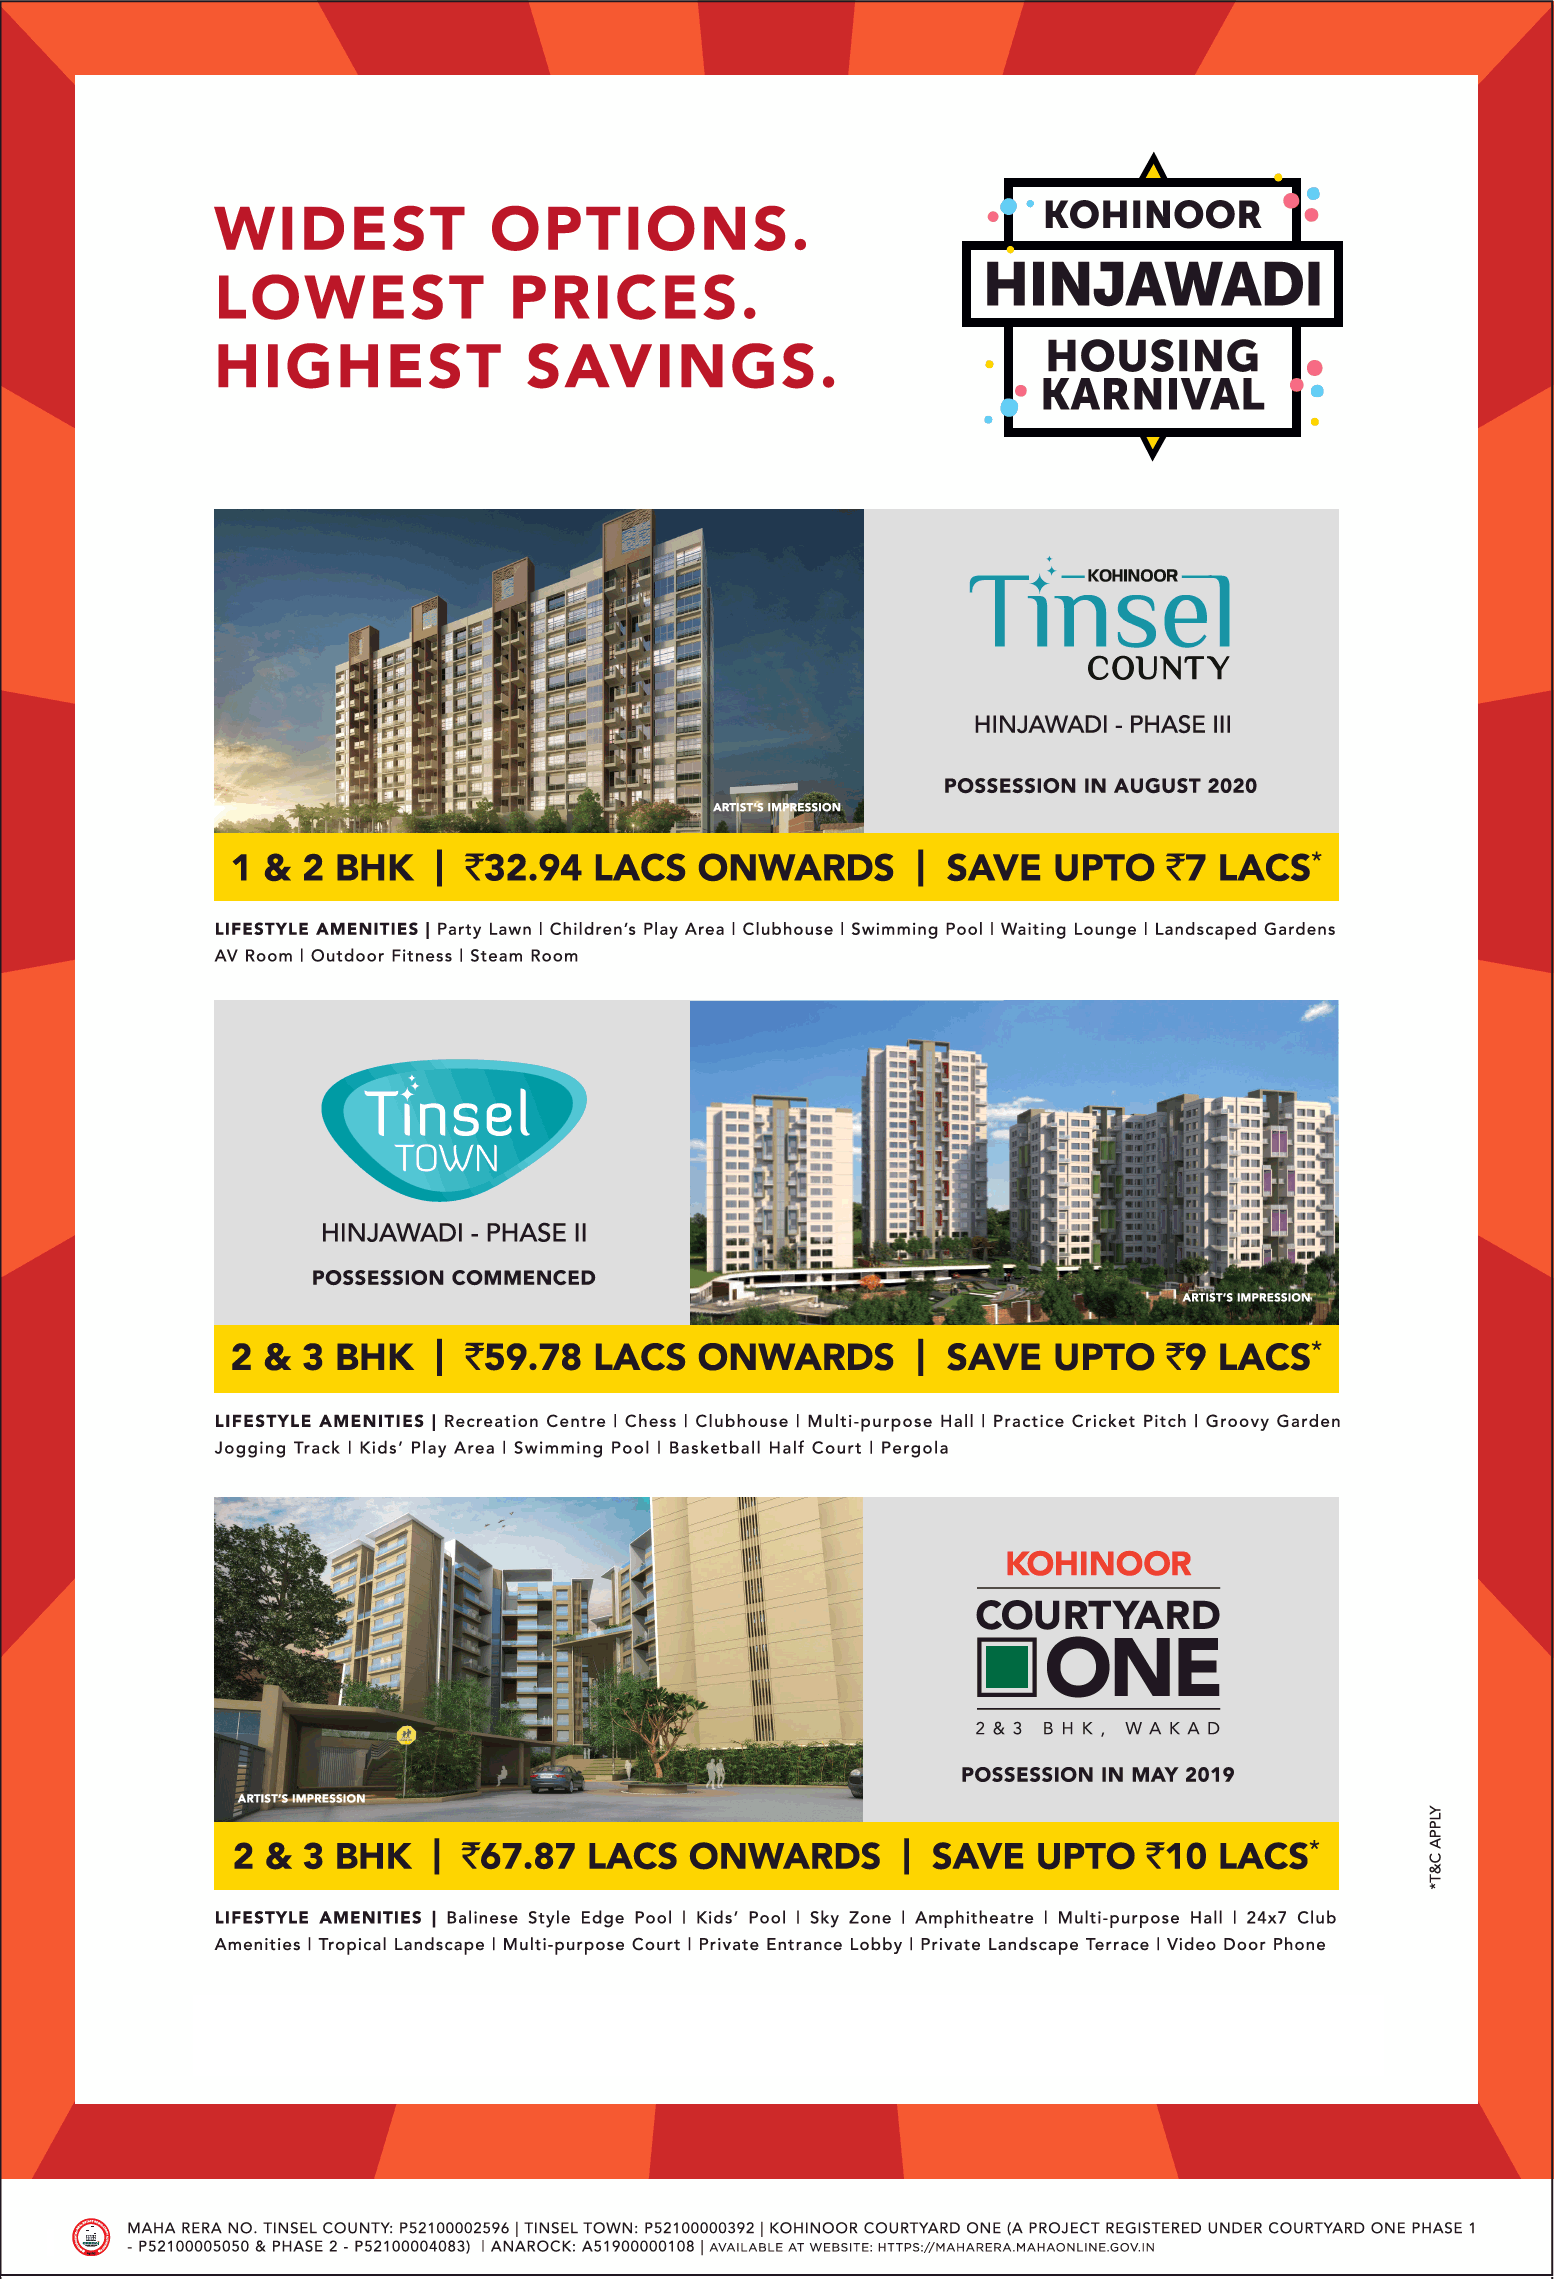 Avail widest options, lowest prices, highest savings at Kohinoor Projects in Hinjawadi, Pune Update